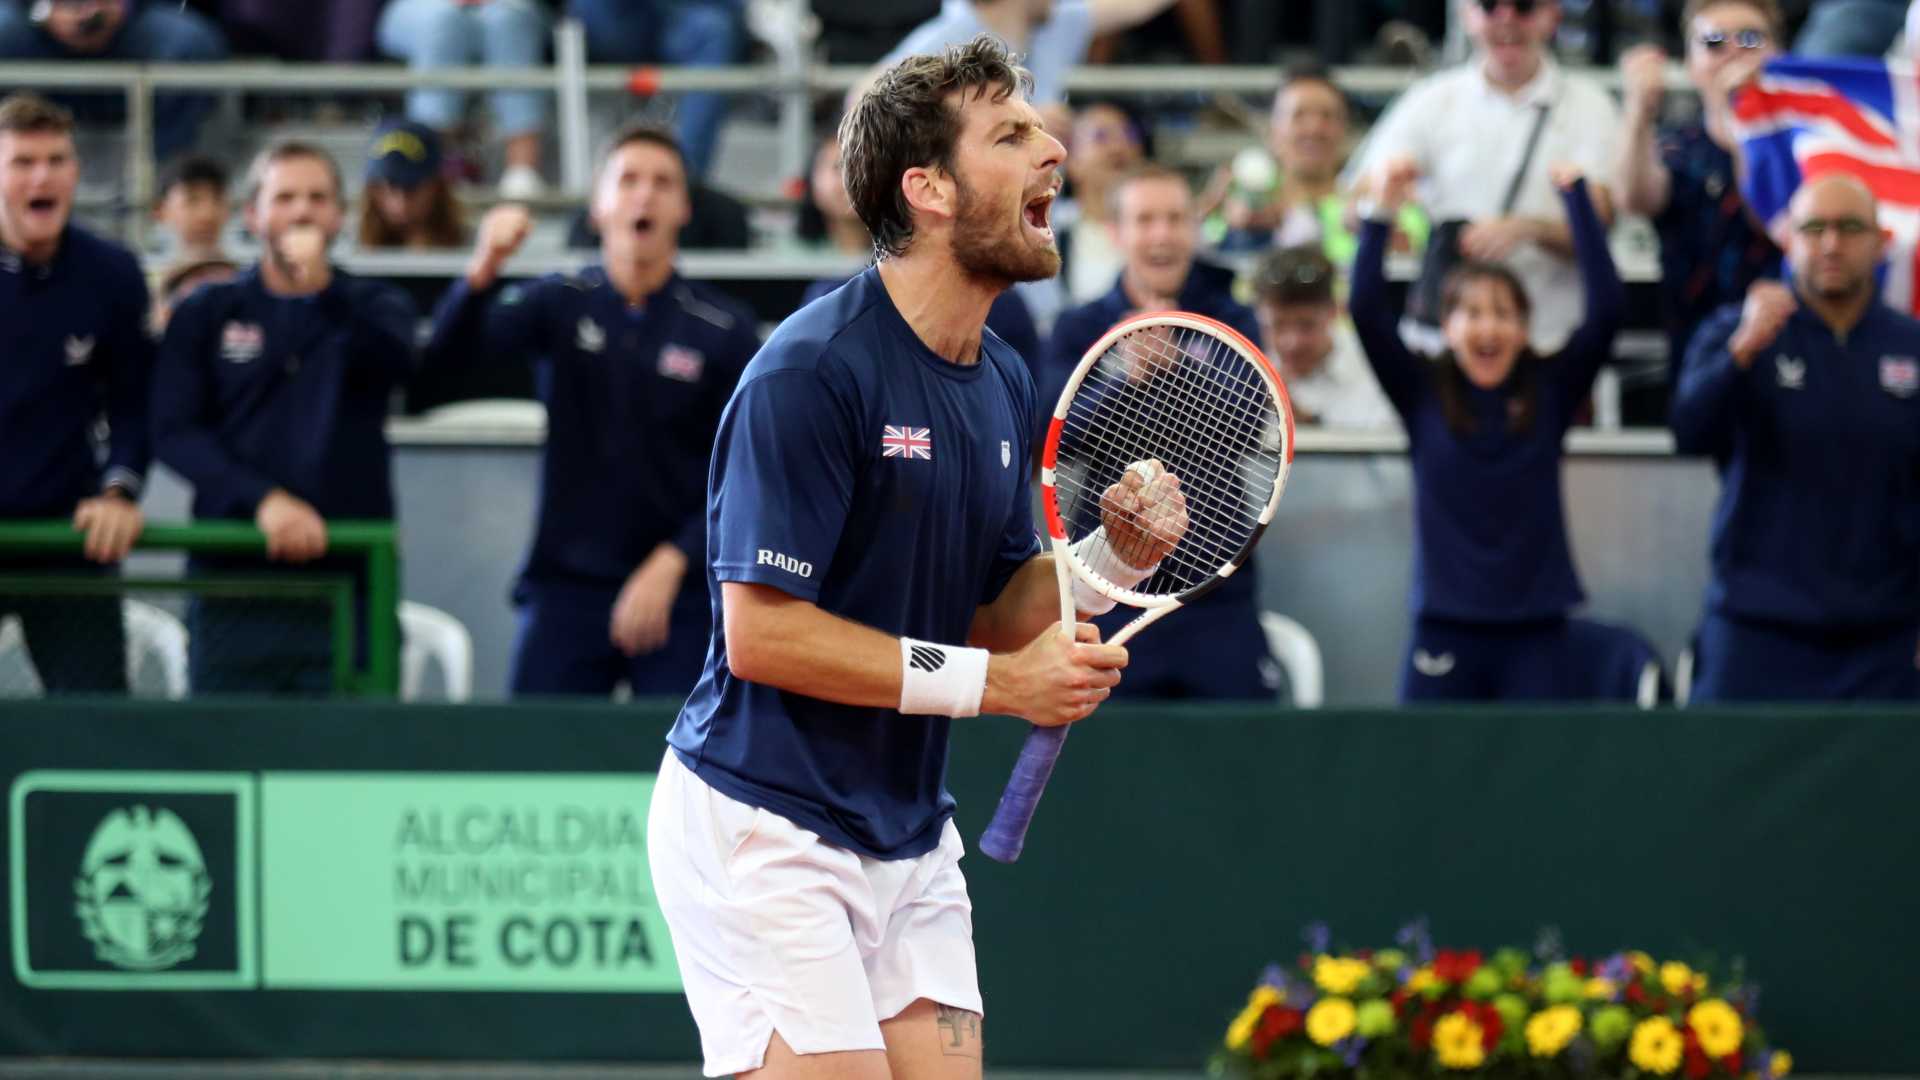 Cameron Norrie celebrates his tie-clinching Davis Cup Qualifier win for Great Britain against Colombia.